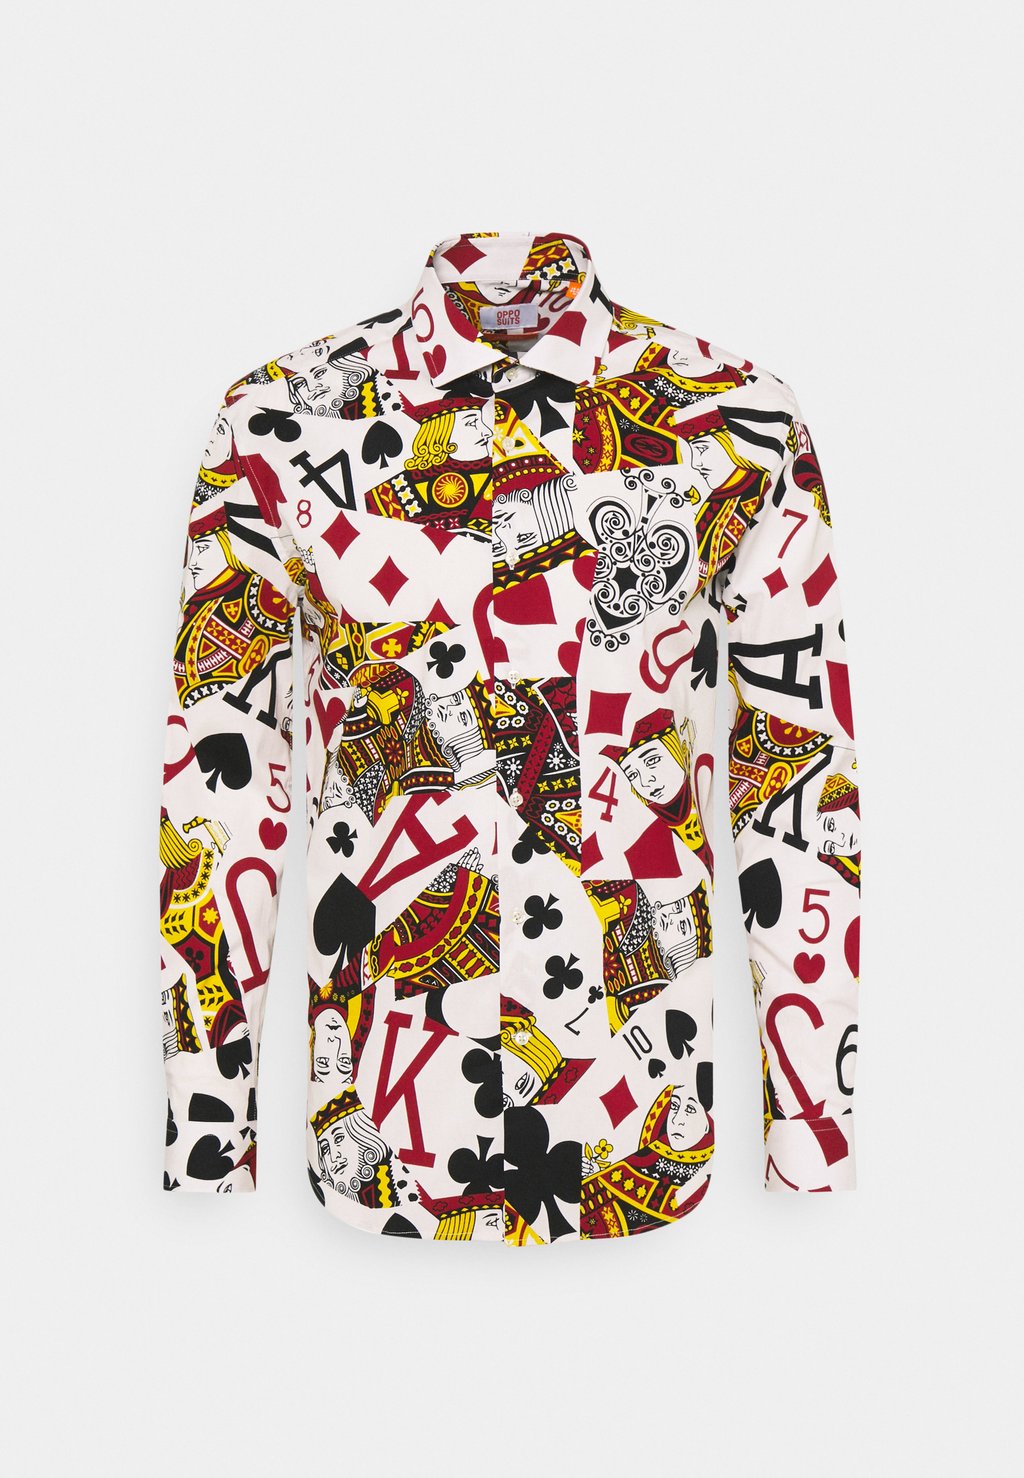 Рубашка King Of Clubs OppoSuits, цвет miscellaneous brand new sm8 wedges golf clubs sm8 sand clubs chipping clubs angle clubs bunker clubs wedges golf clubs sand clubs